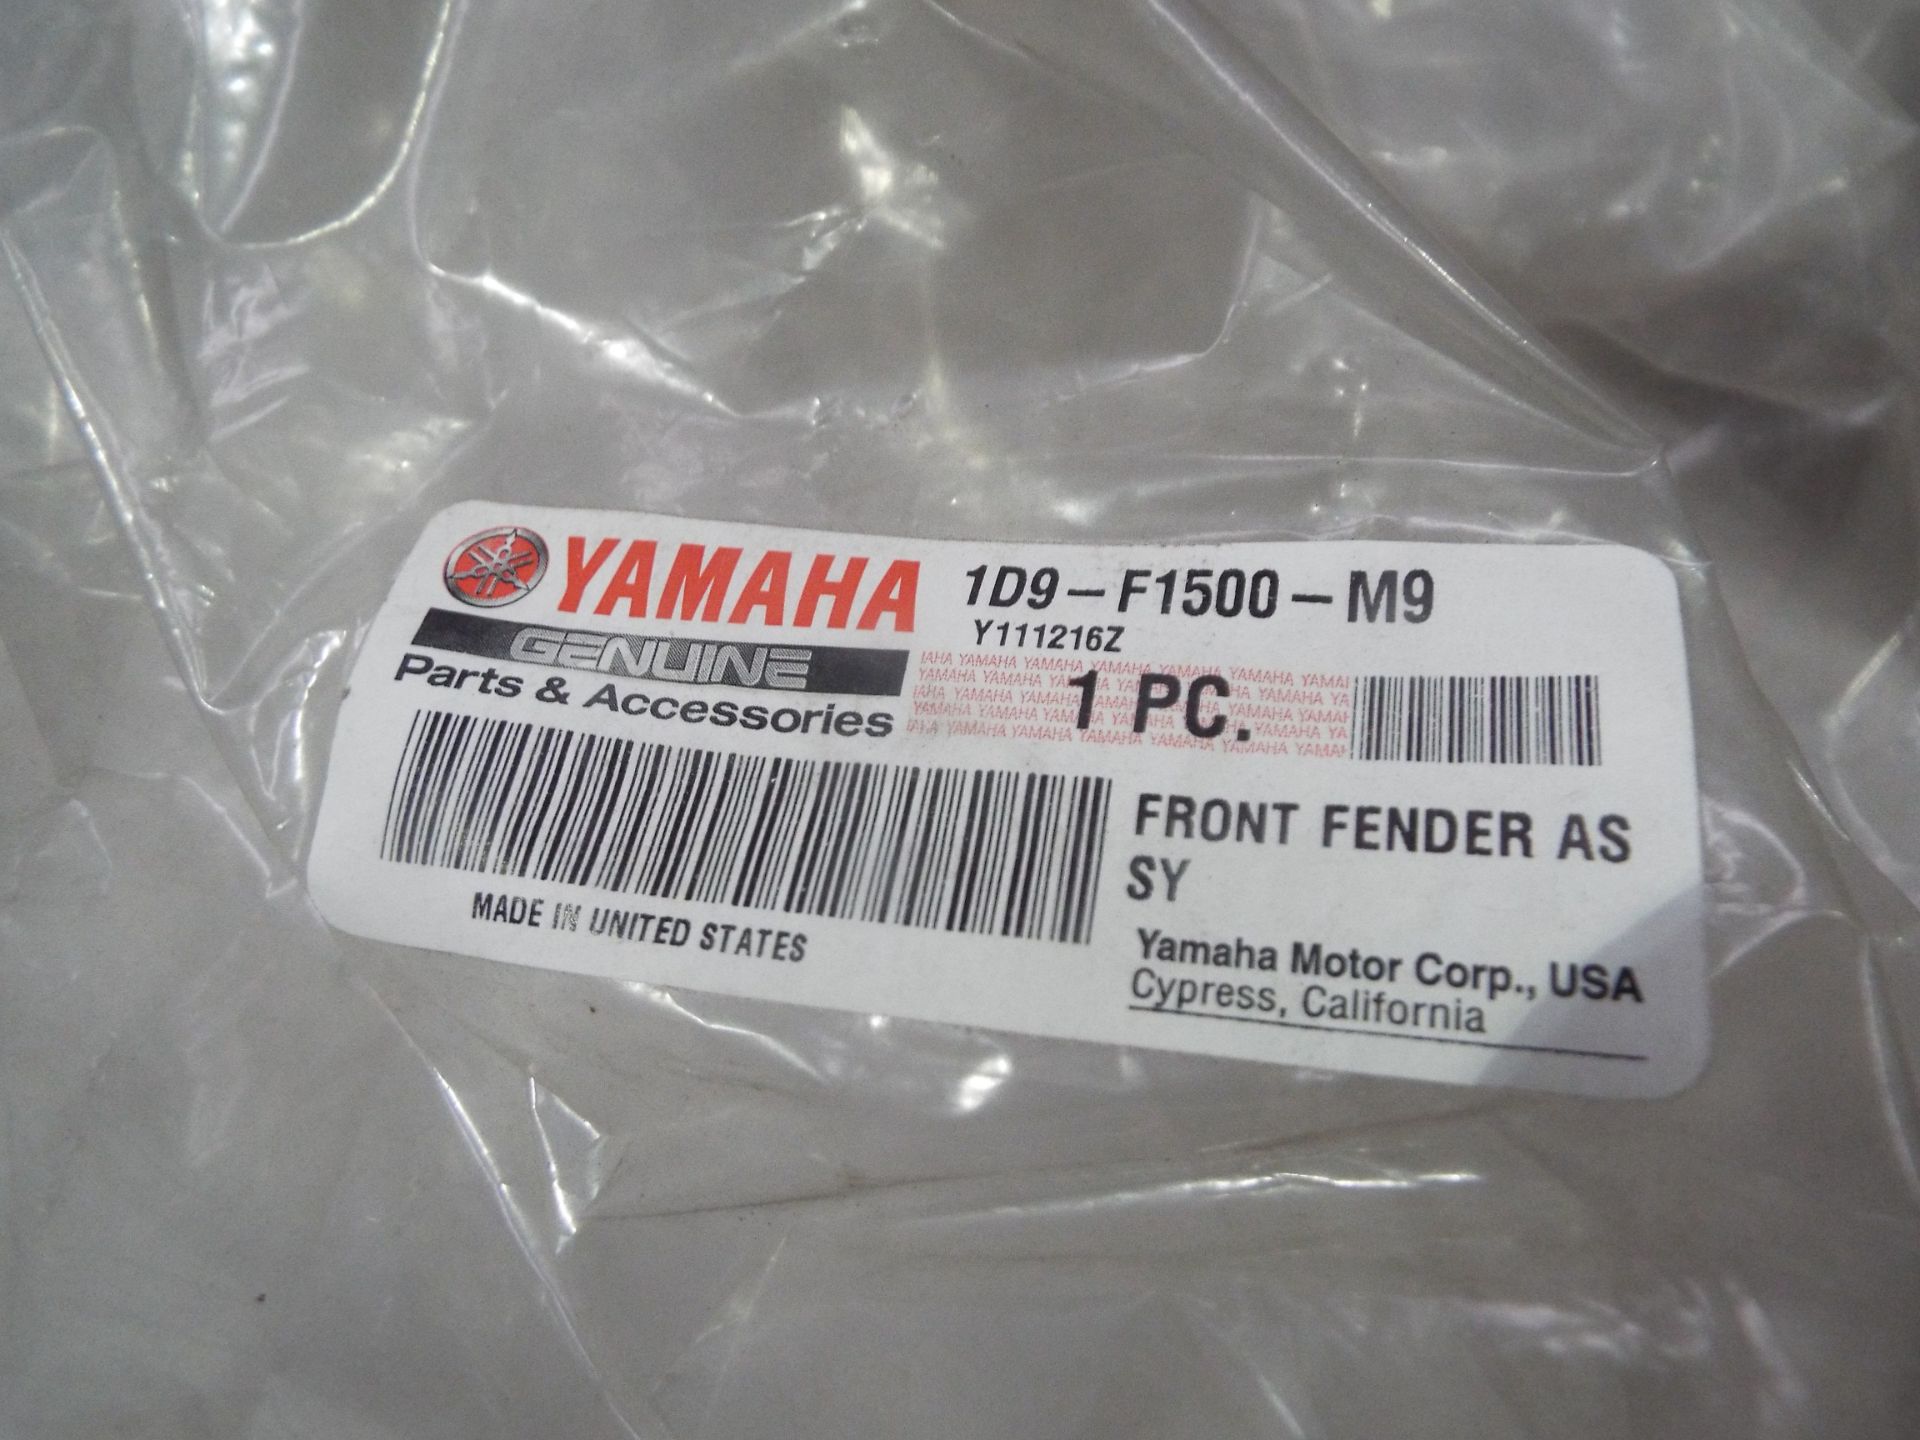 Yamaha Grizzly Front Fender P/No 1D9-F1500-M9 - Image 5 of 6